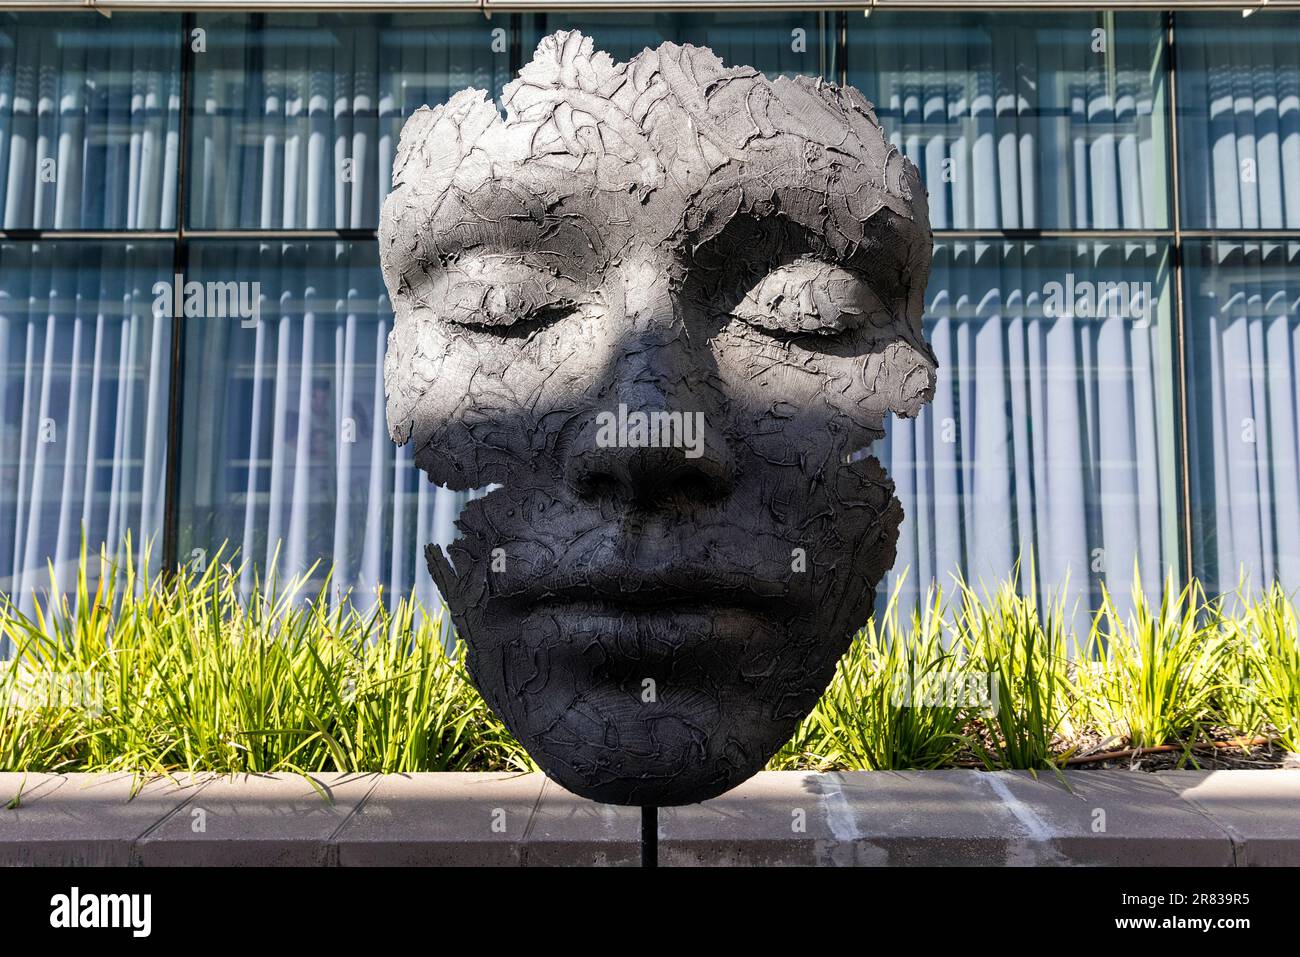 Large bronze face sculpture by artist Marco Olivier in the V&A Waterfront - Cape Town, South Africa Stock Photo